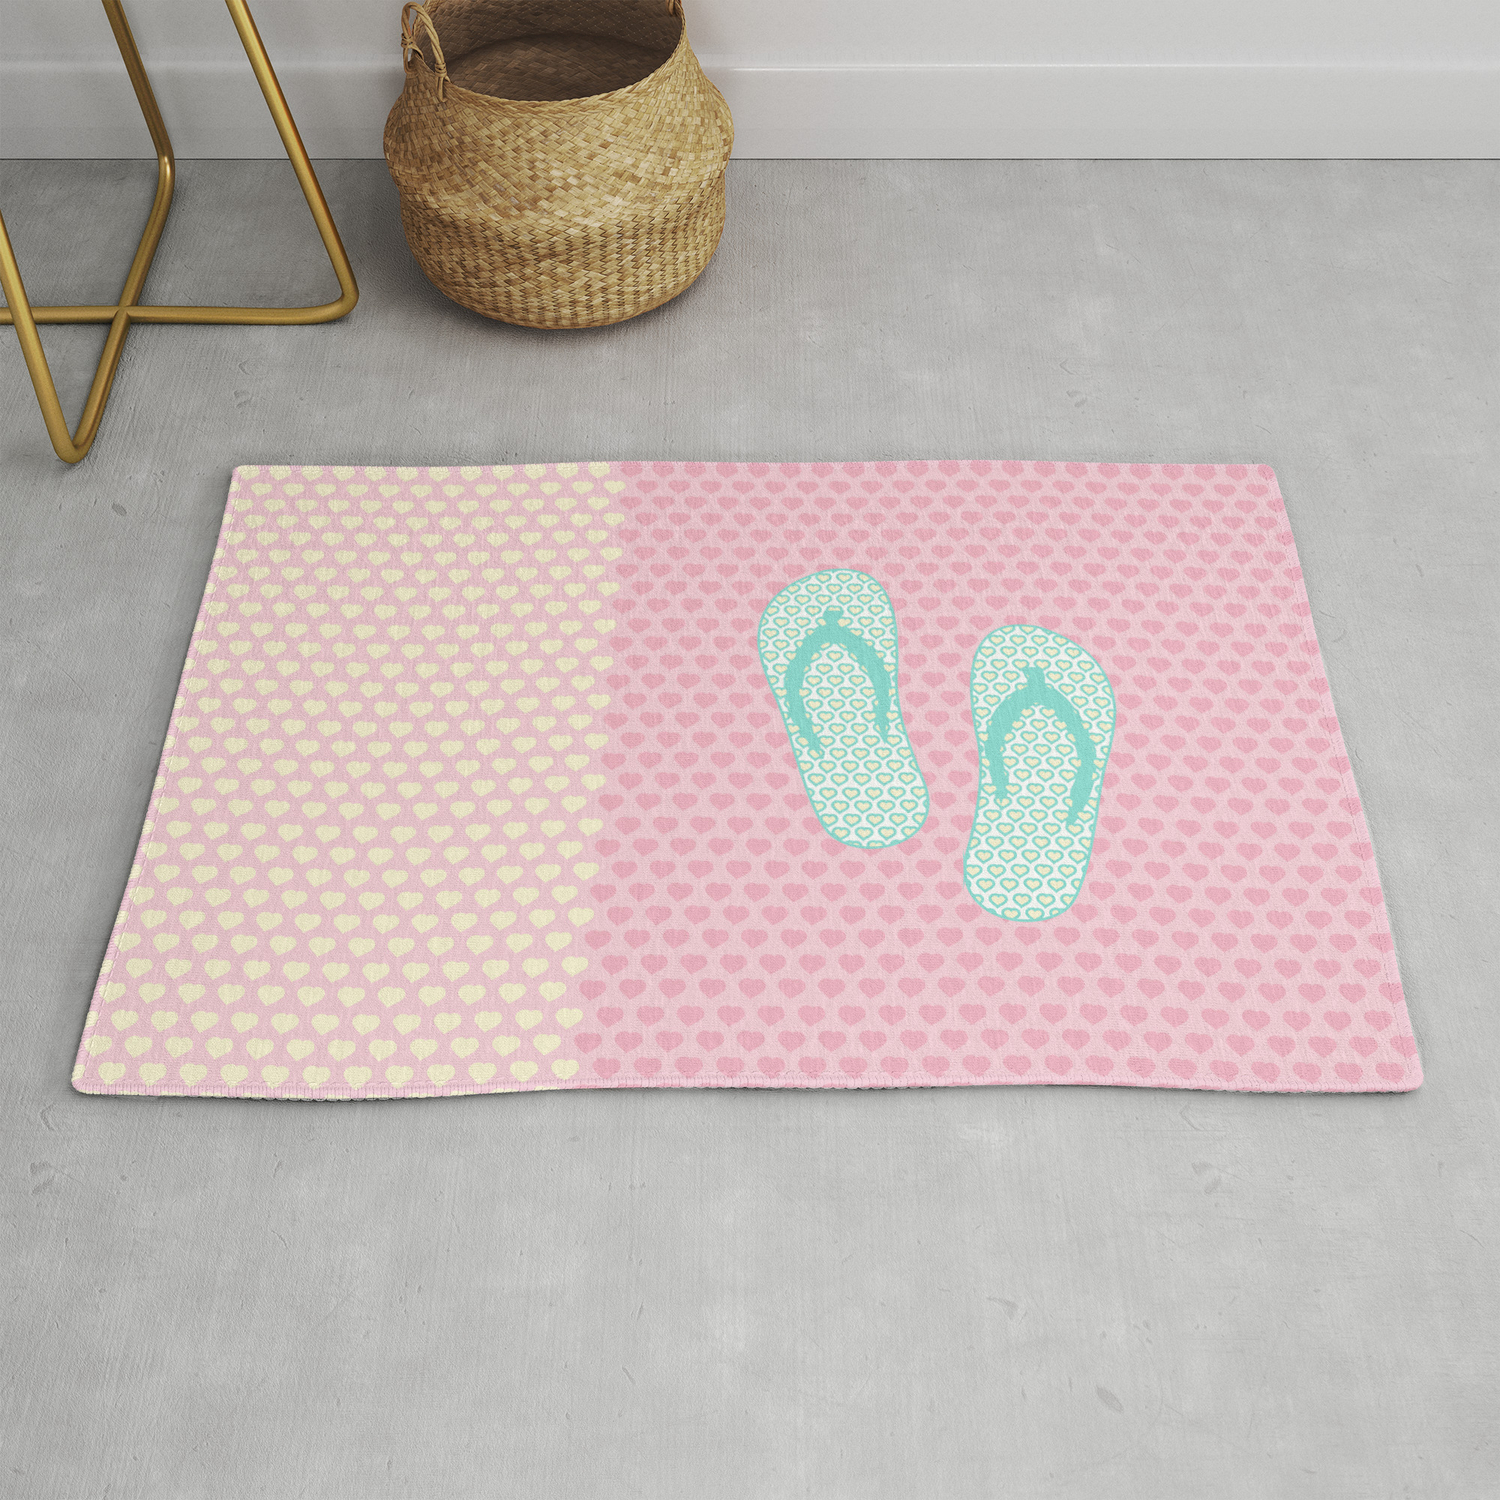 Flip Flop Pastel Rug By Xooxoo Society6, Flip Flop Rugs